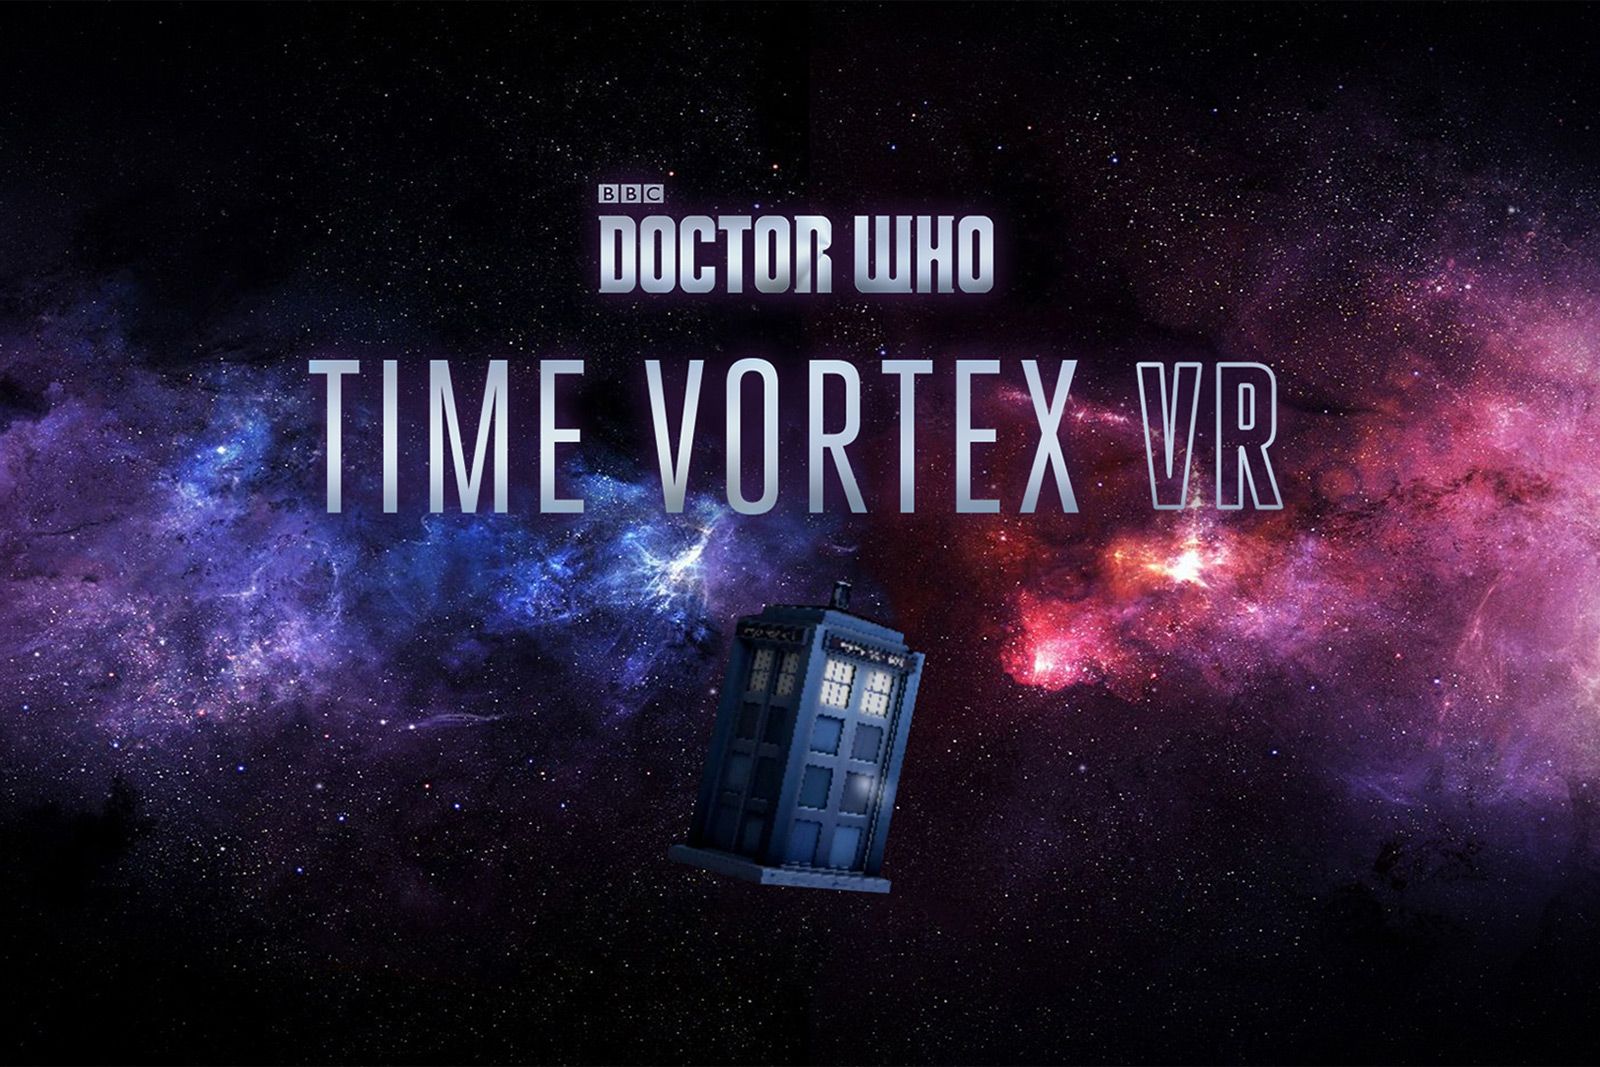 Pilot Doctor Whos Tardis through time and space in Time Vortex VR game image 1